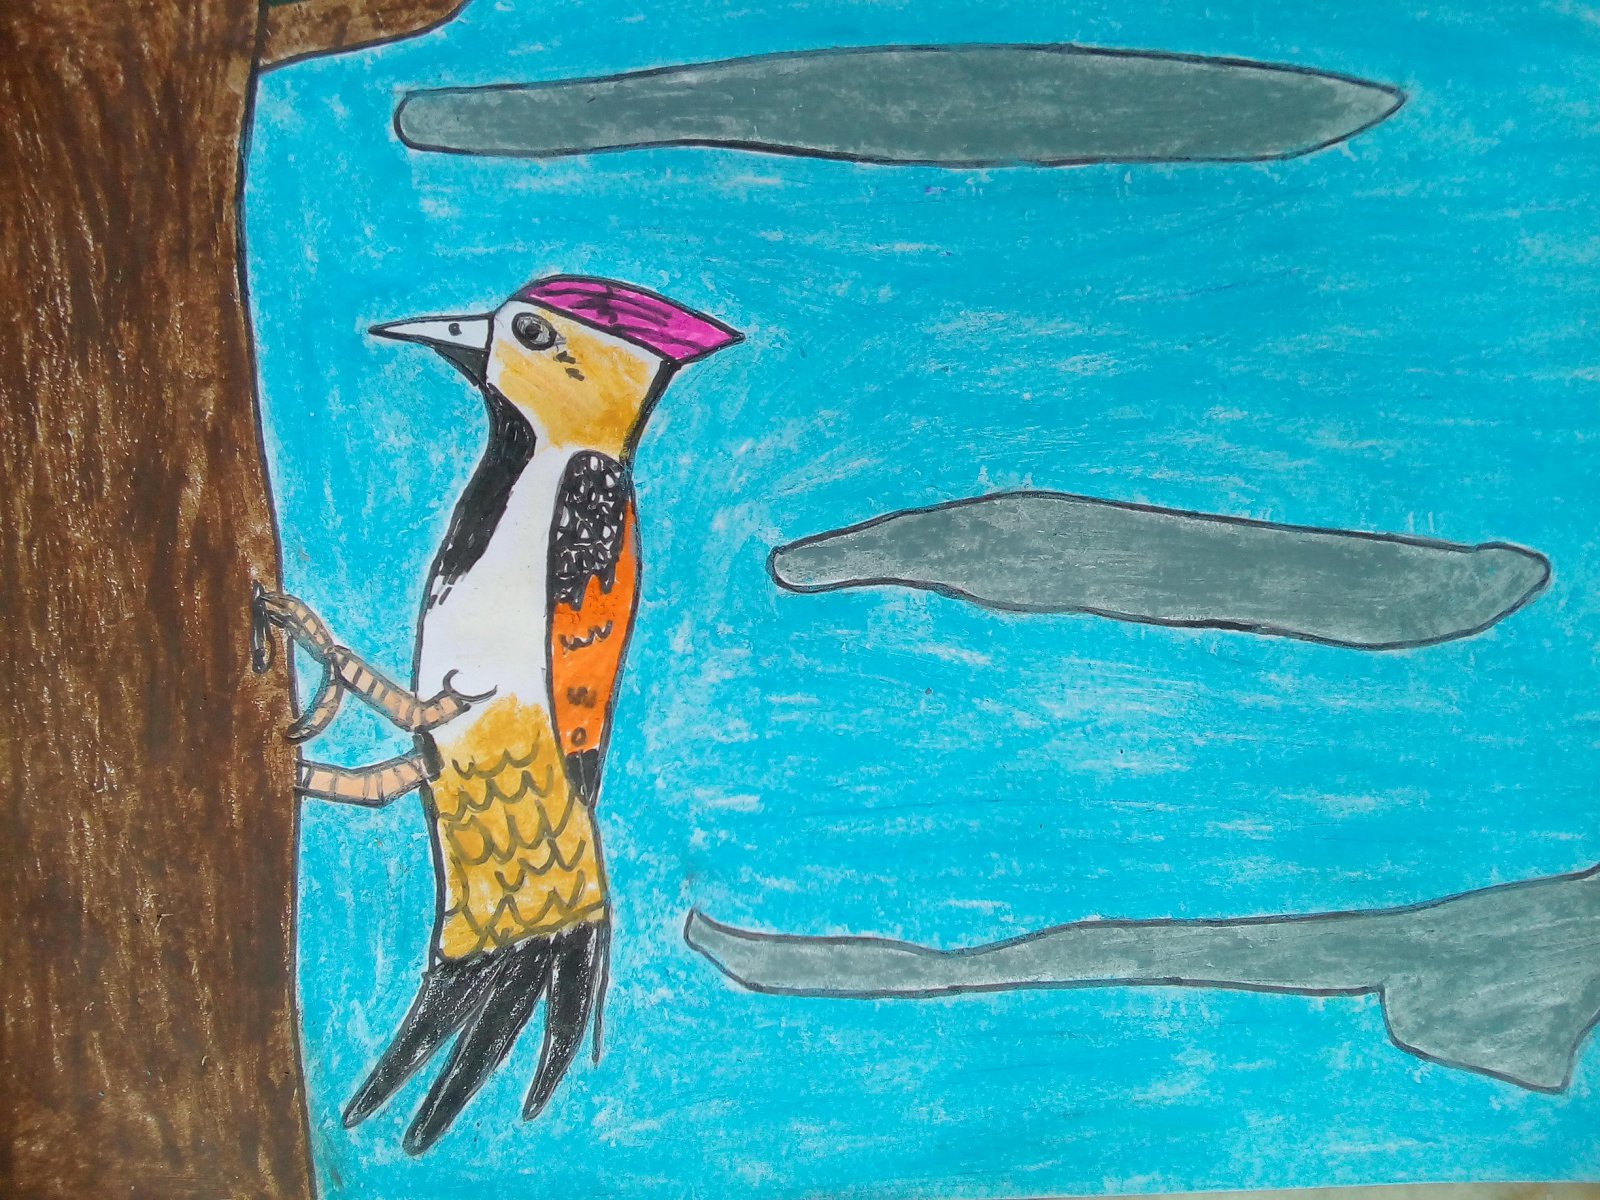 WOODPECKER(Bird that eat worms by making holes in the tree. this help tree from disease). - JOHN ( JOHN ART Gallery 2019).